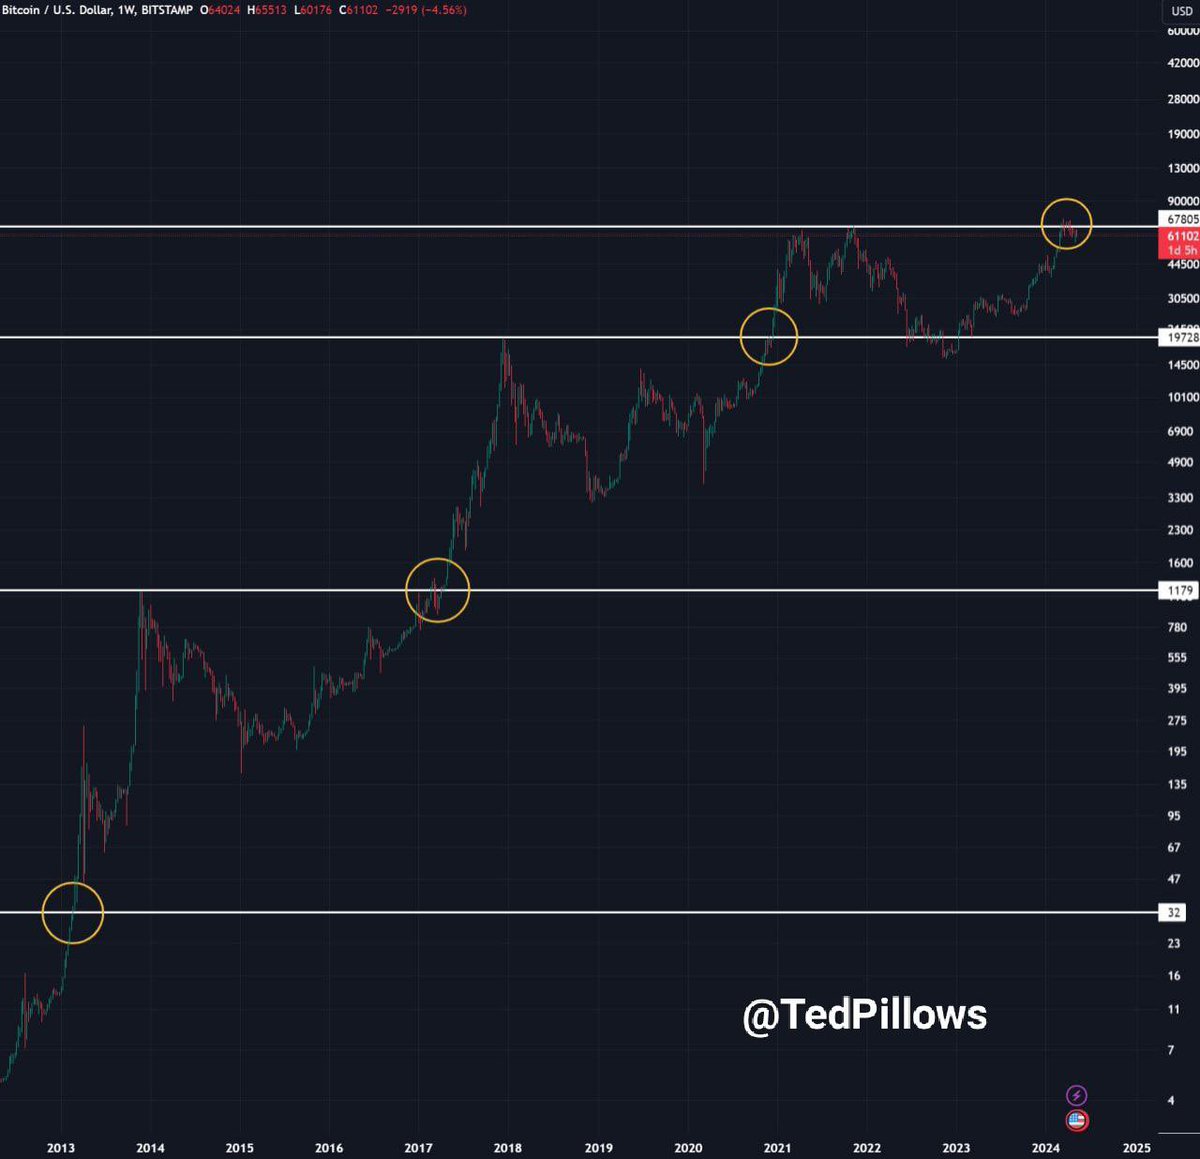 #Bitcoin is currently going through an accumulation phase.
 
Zoom out and see what happened in 2013, 2017, and 2021 when it broke through it.